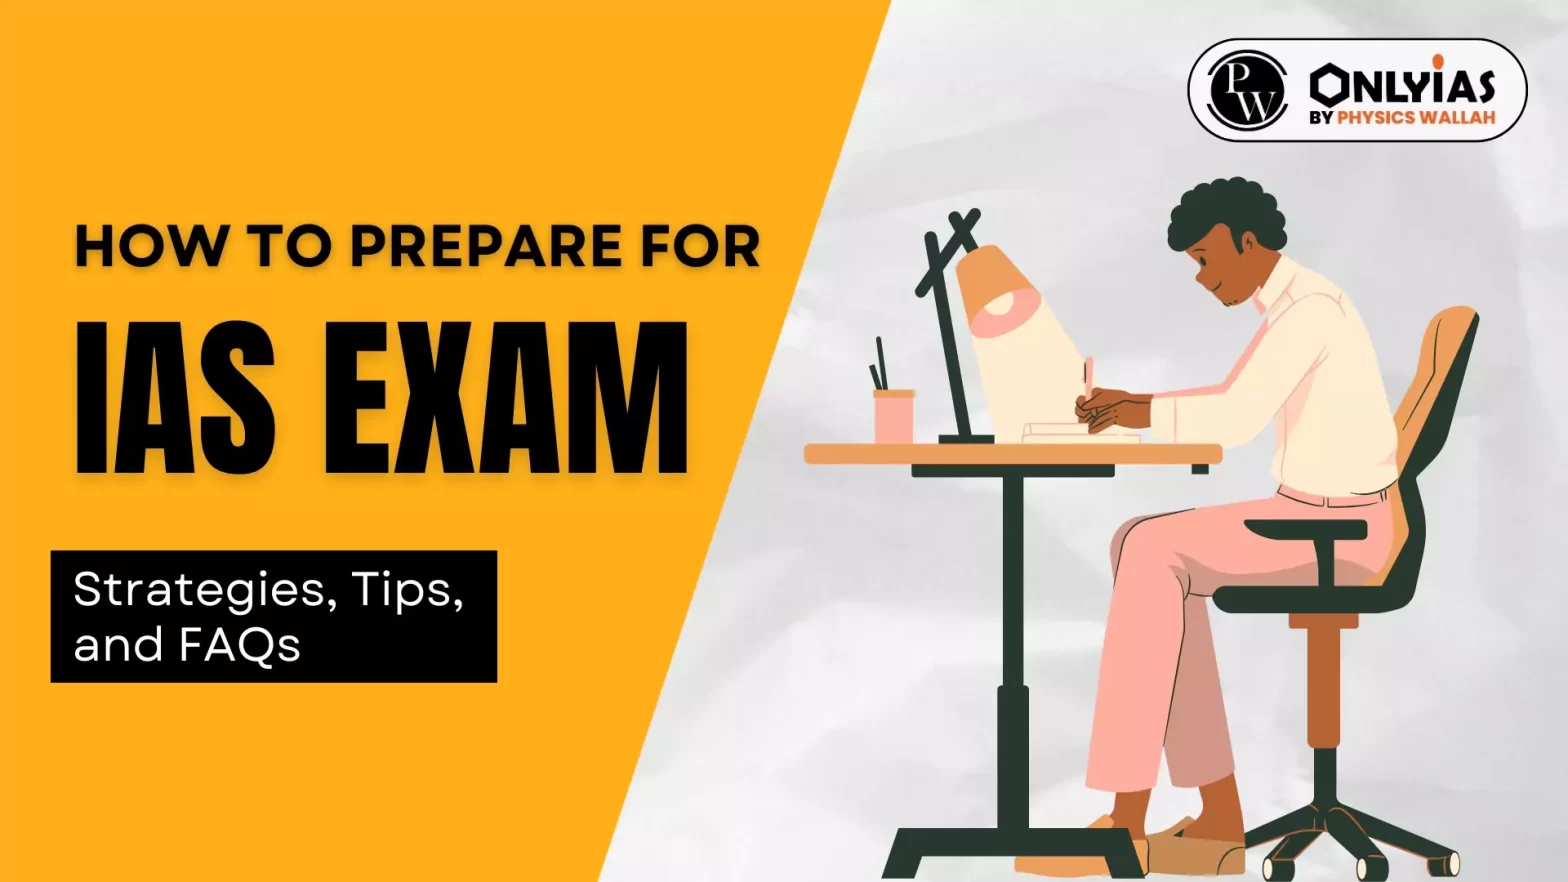 How to Prepare for IAS Exam: Strategies, Tips, and FAQs